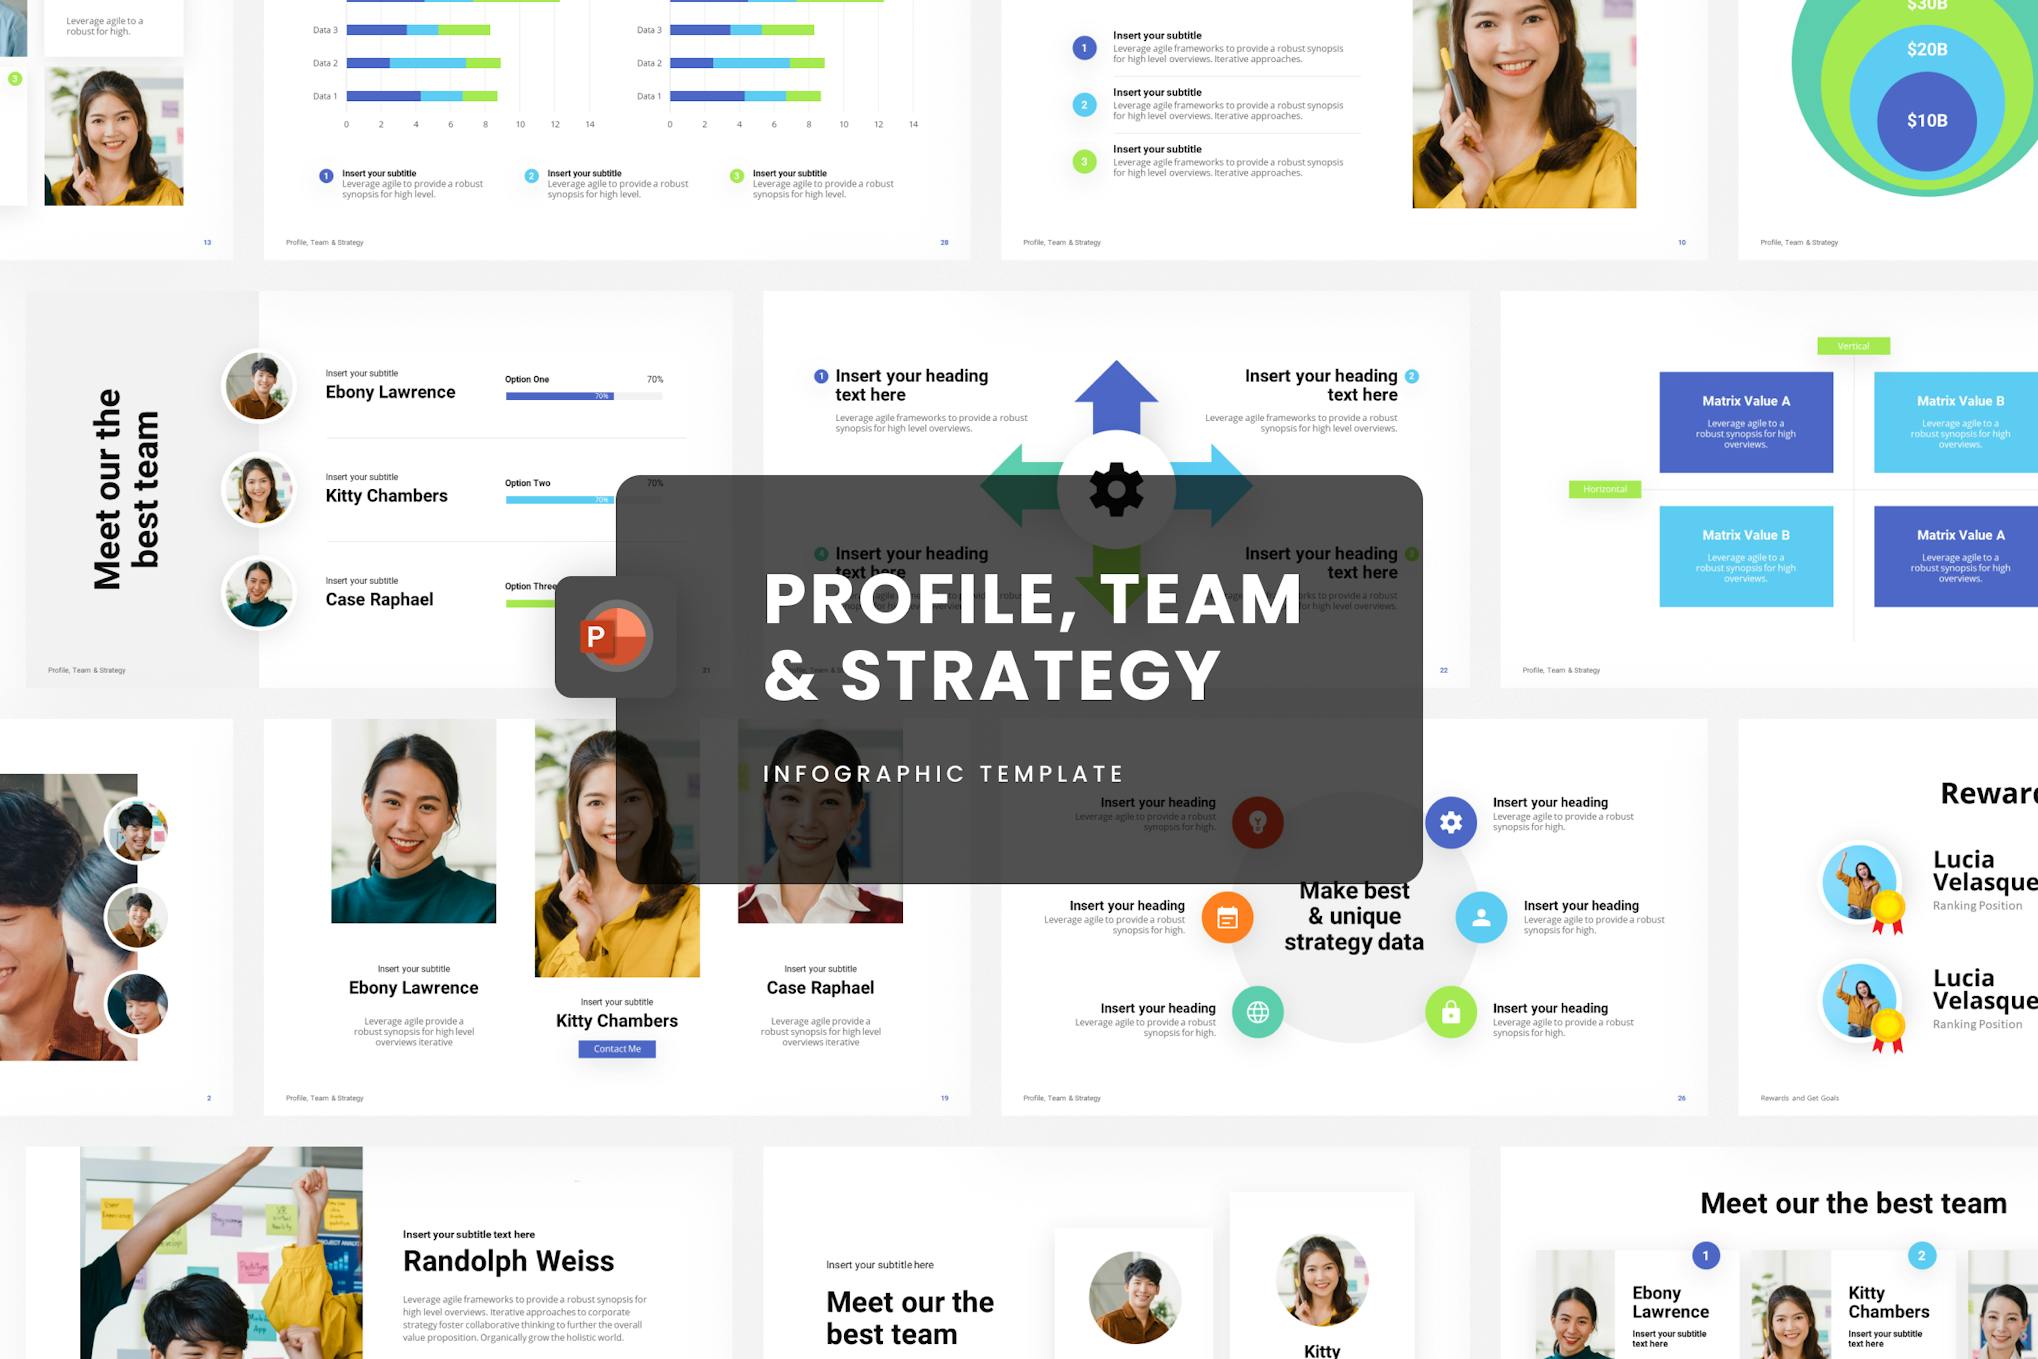 User Profile, Team & Strategy Template